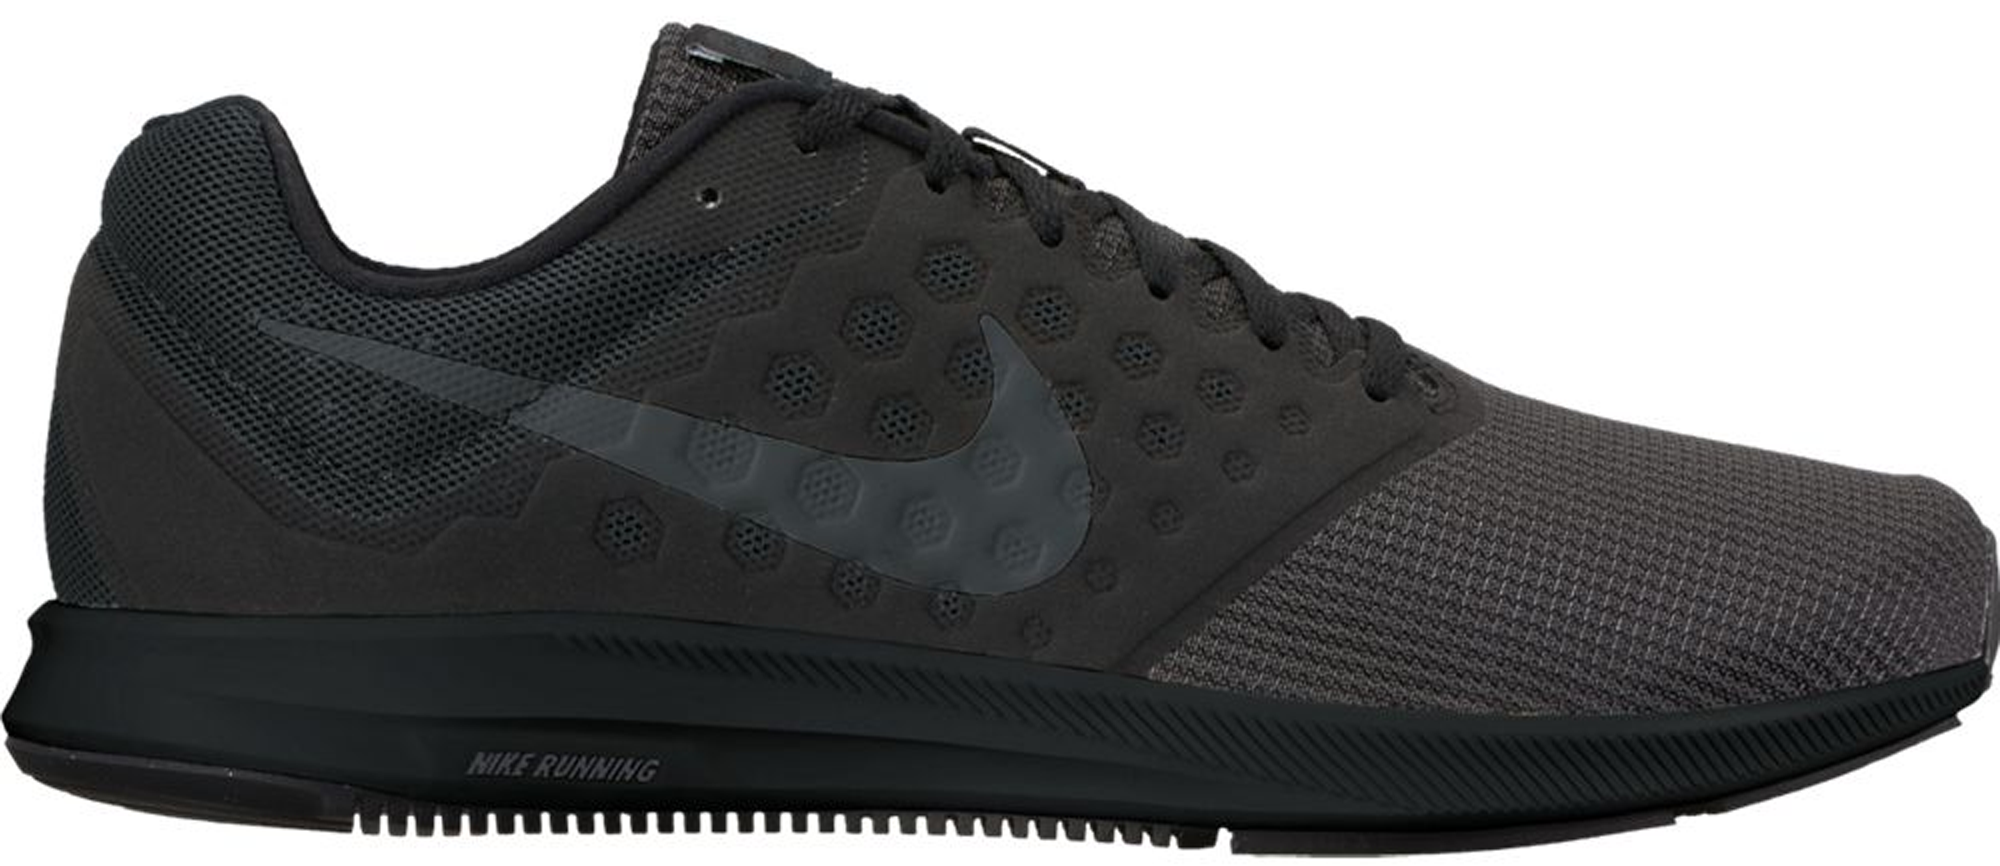 Nike Downshifter 7 Black Anthracite 